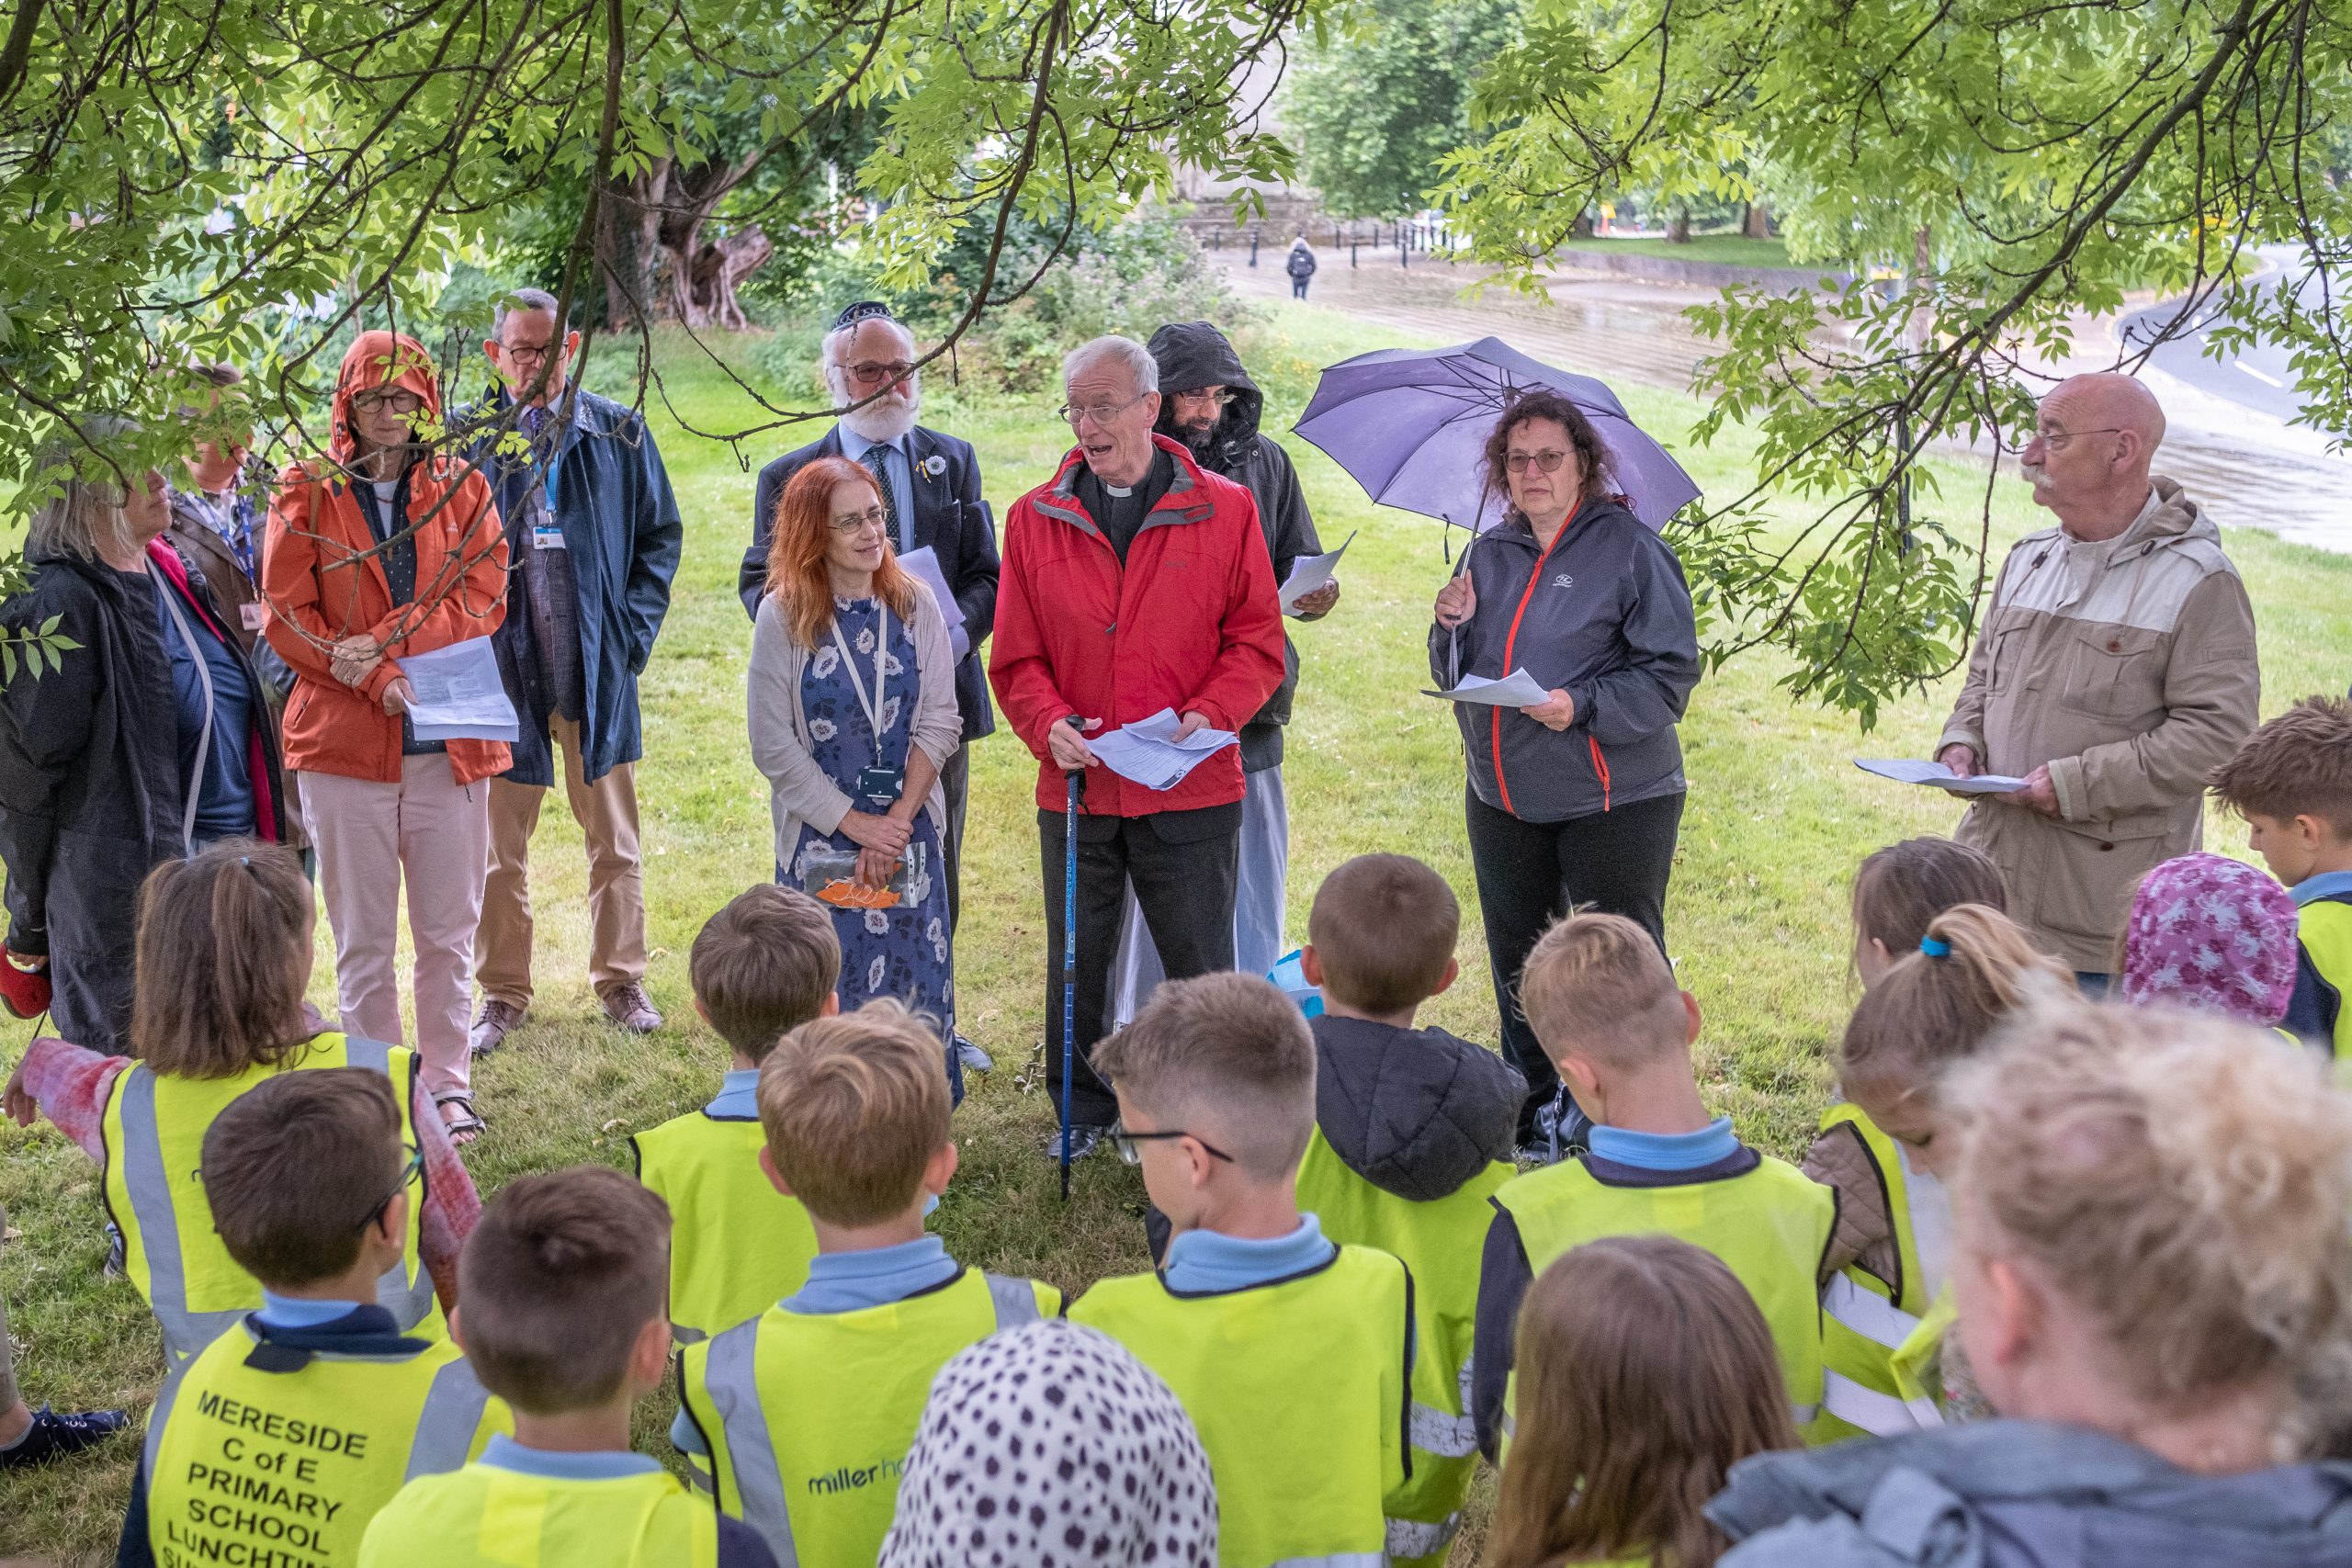 Rev Ken Chippindale from the Shrewsbury Interfaith Forum talking to pupils from Mereside Primary School by the Srebrenica tree outside Shirehall in Shrewsbury.